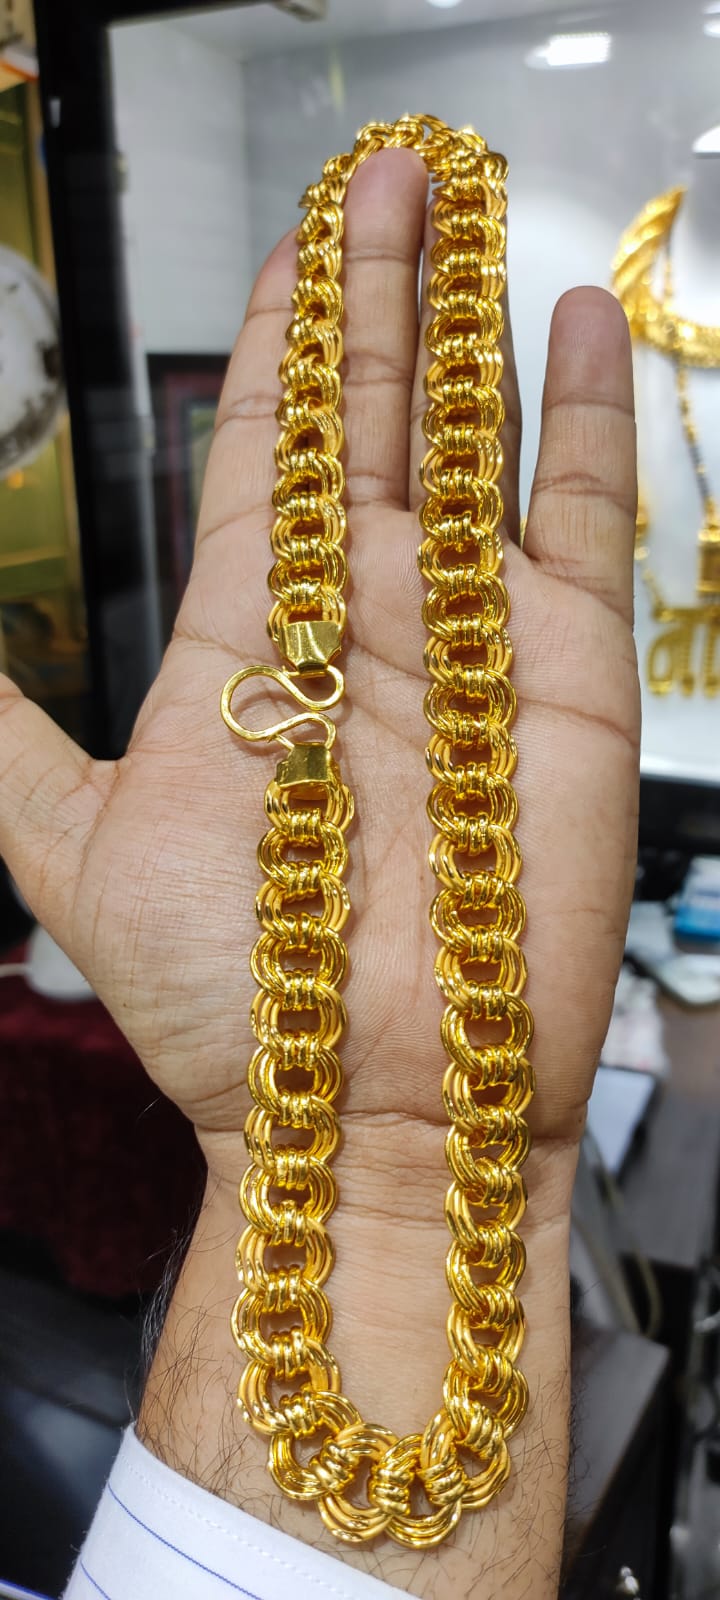 Triple Kunda Chain 21 inch 85 Gram 15.5 MM Thickness In 200 Mg Gold Forming (20230808)